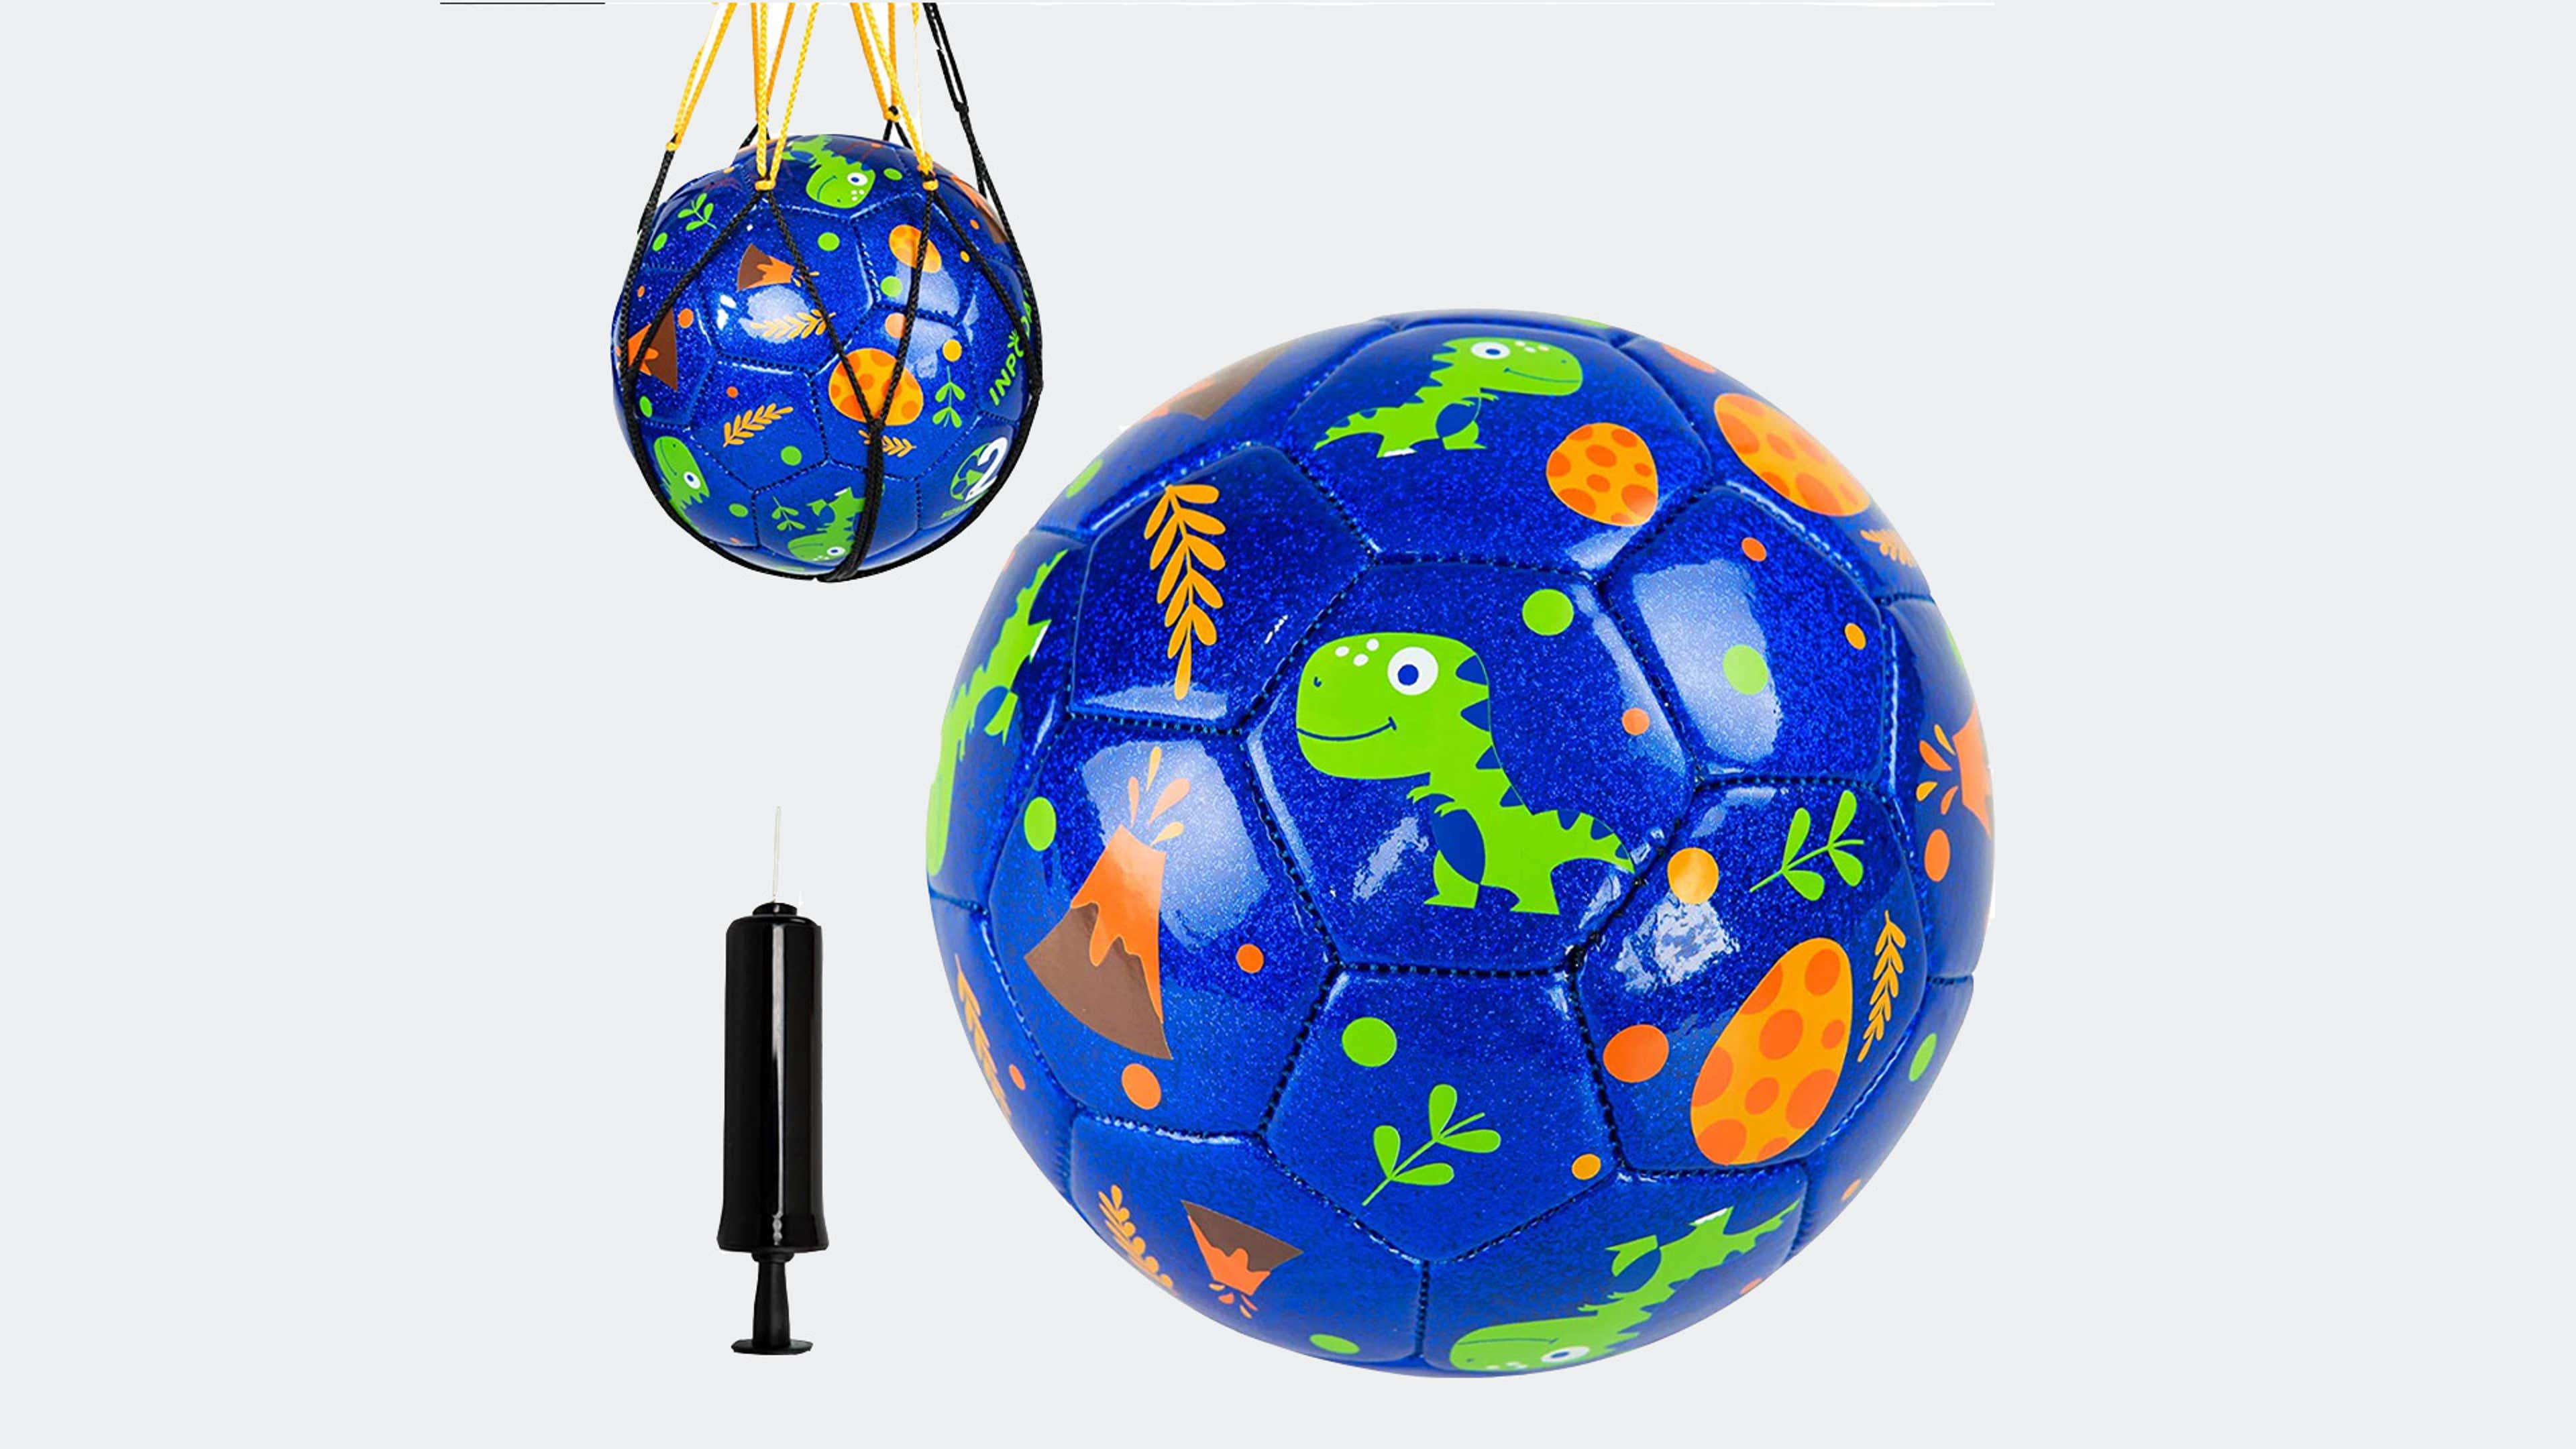 Keeinow Soccer Gifts, Soccer Gifts for Boys 8-12, Unique Soccer Gifts for  Girls 10-12, Soccer Gifts for Men, Women, Dad, Mom, Best Gifts for Soccer